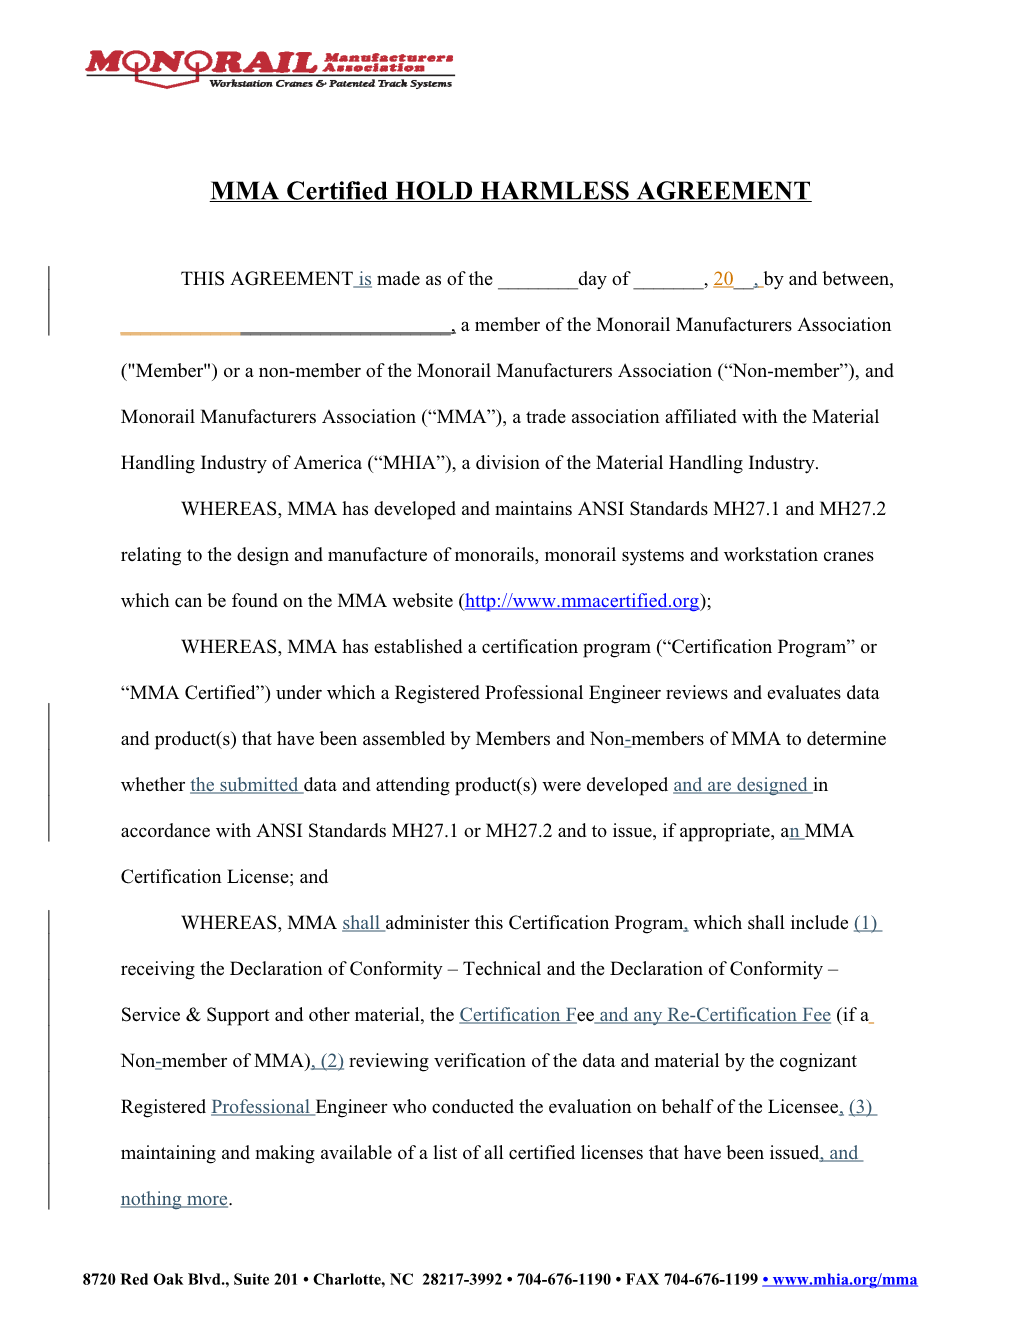 MMA Certified Hold Harmless Agreementpage 1 of 3